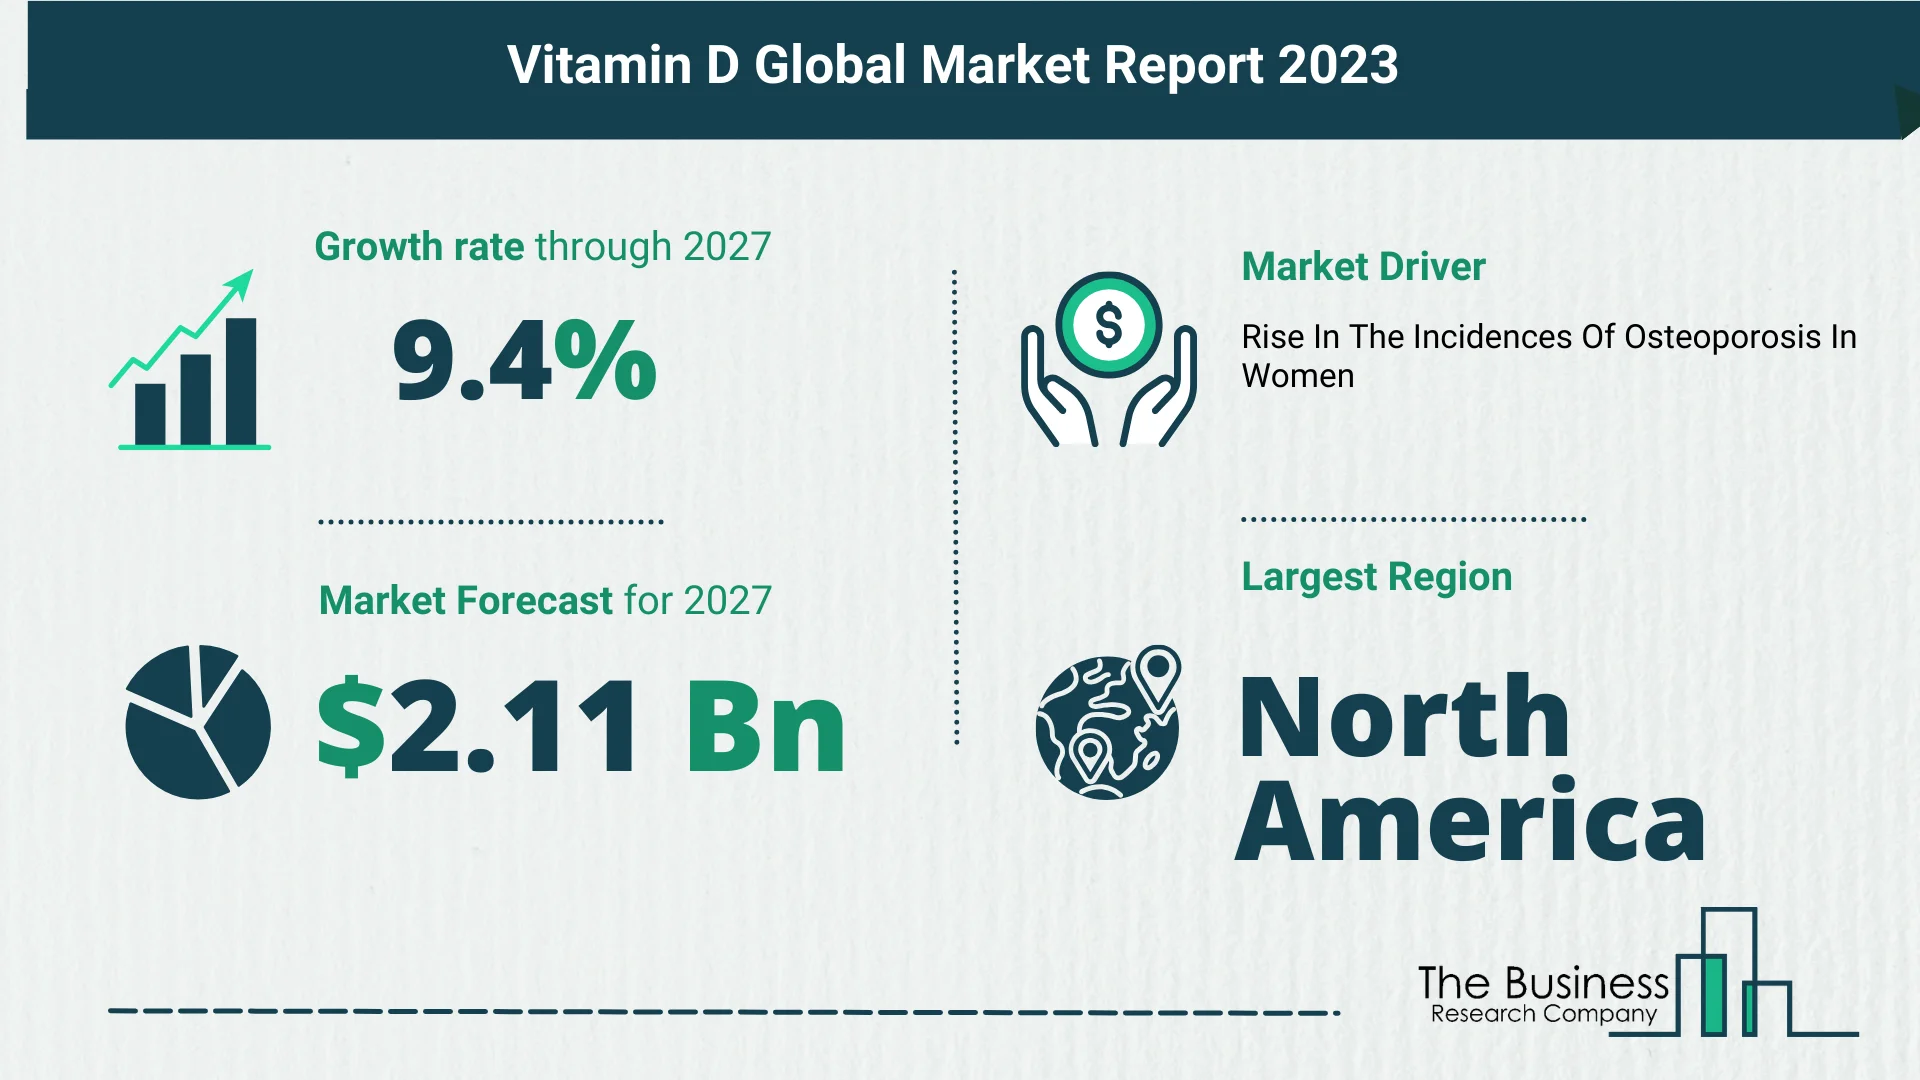 How Is The Vitamin D Market Expected To Grow Through 2023-2032